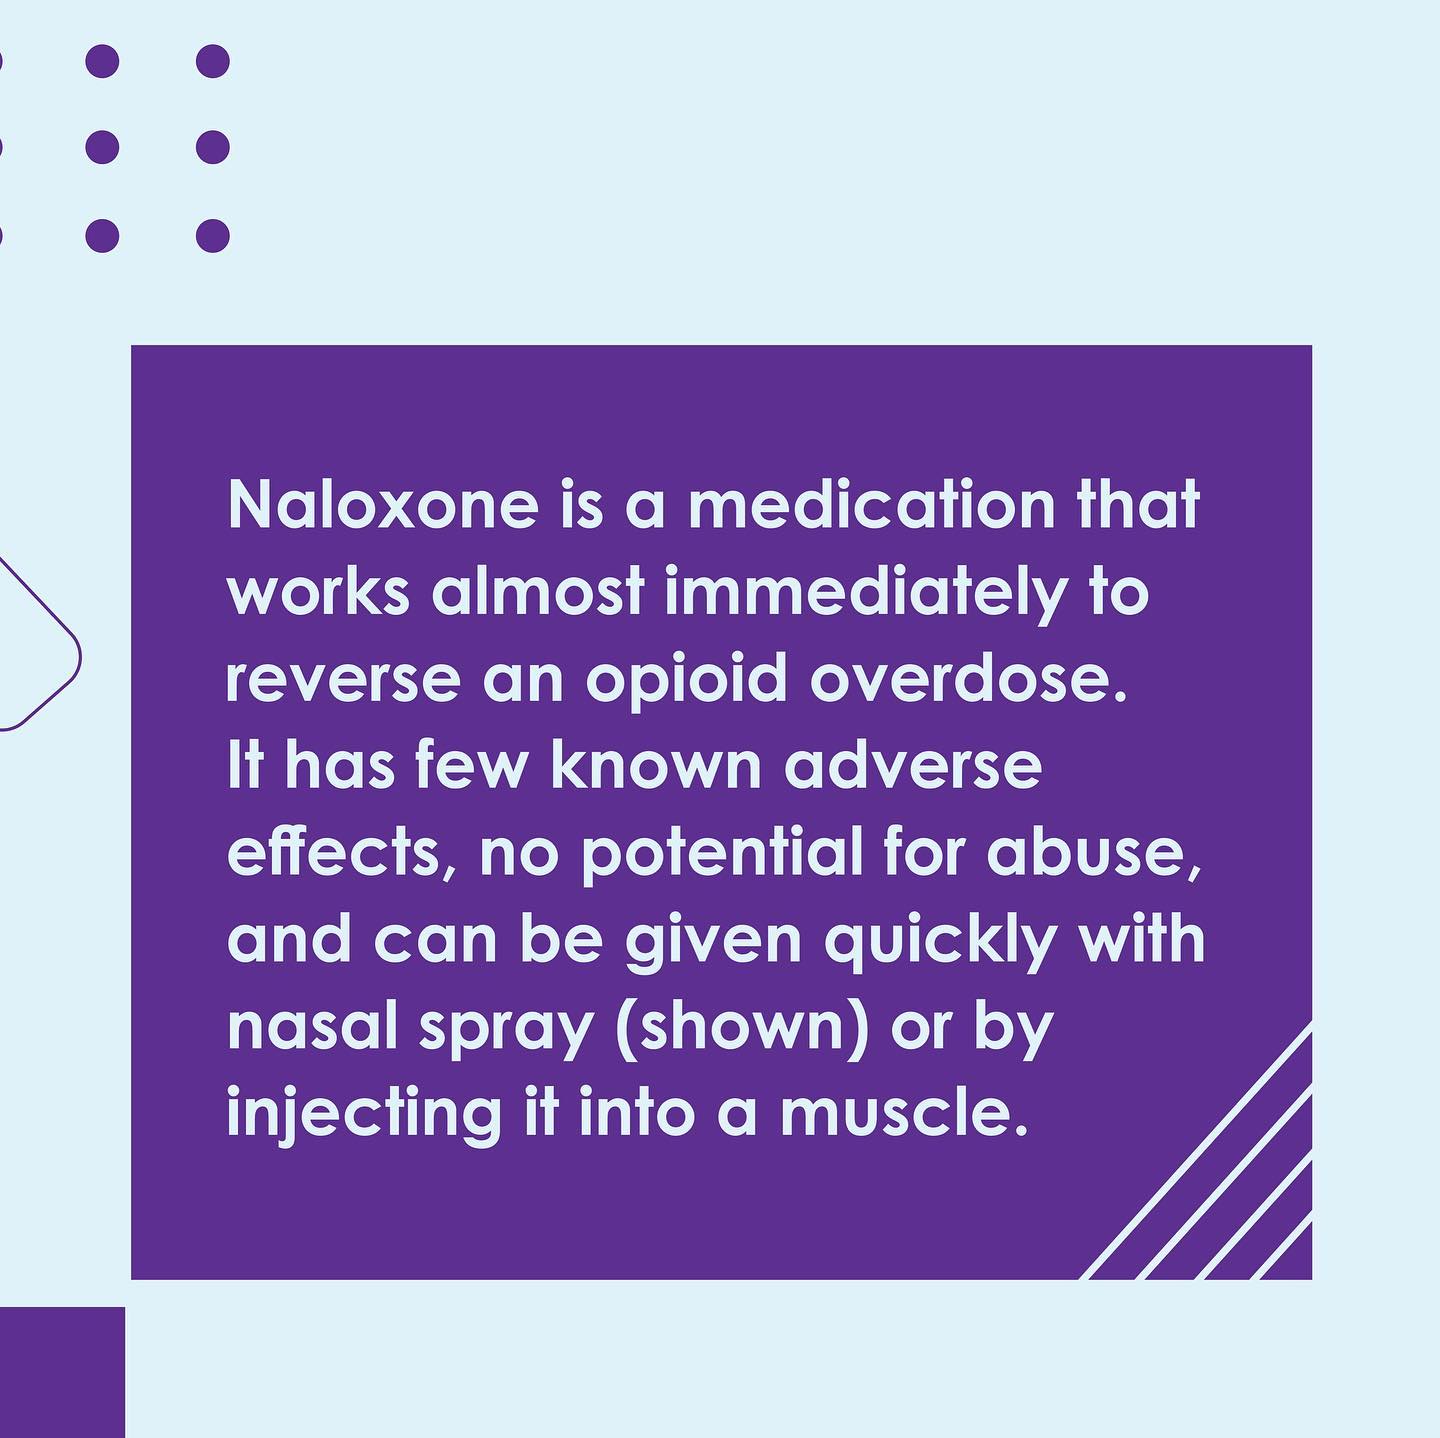 Naxalone is a medication that works almost immediately to reverse an opiodid overdose.